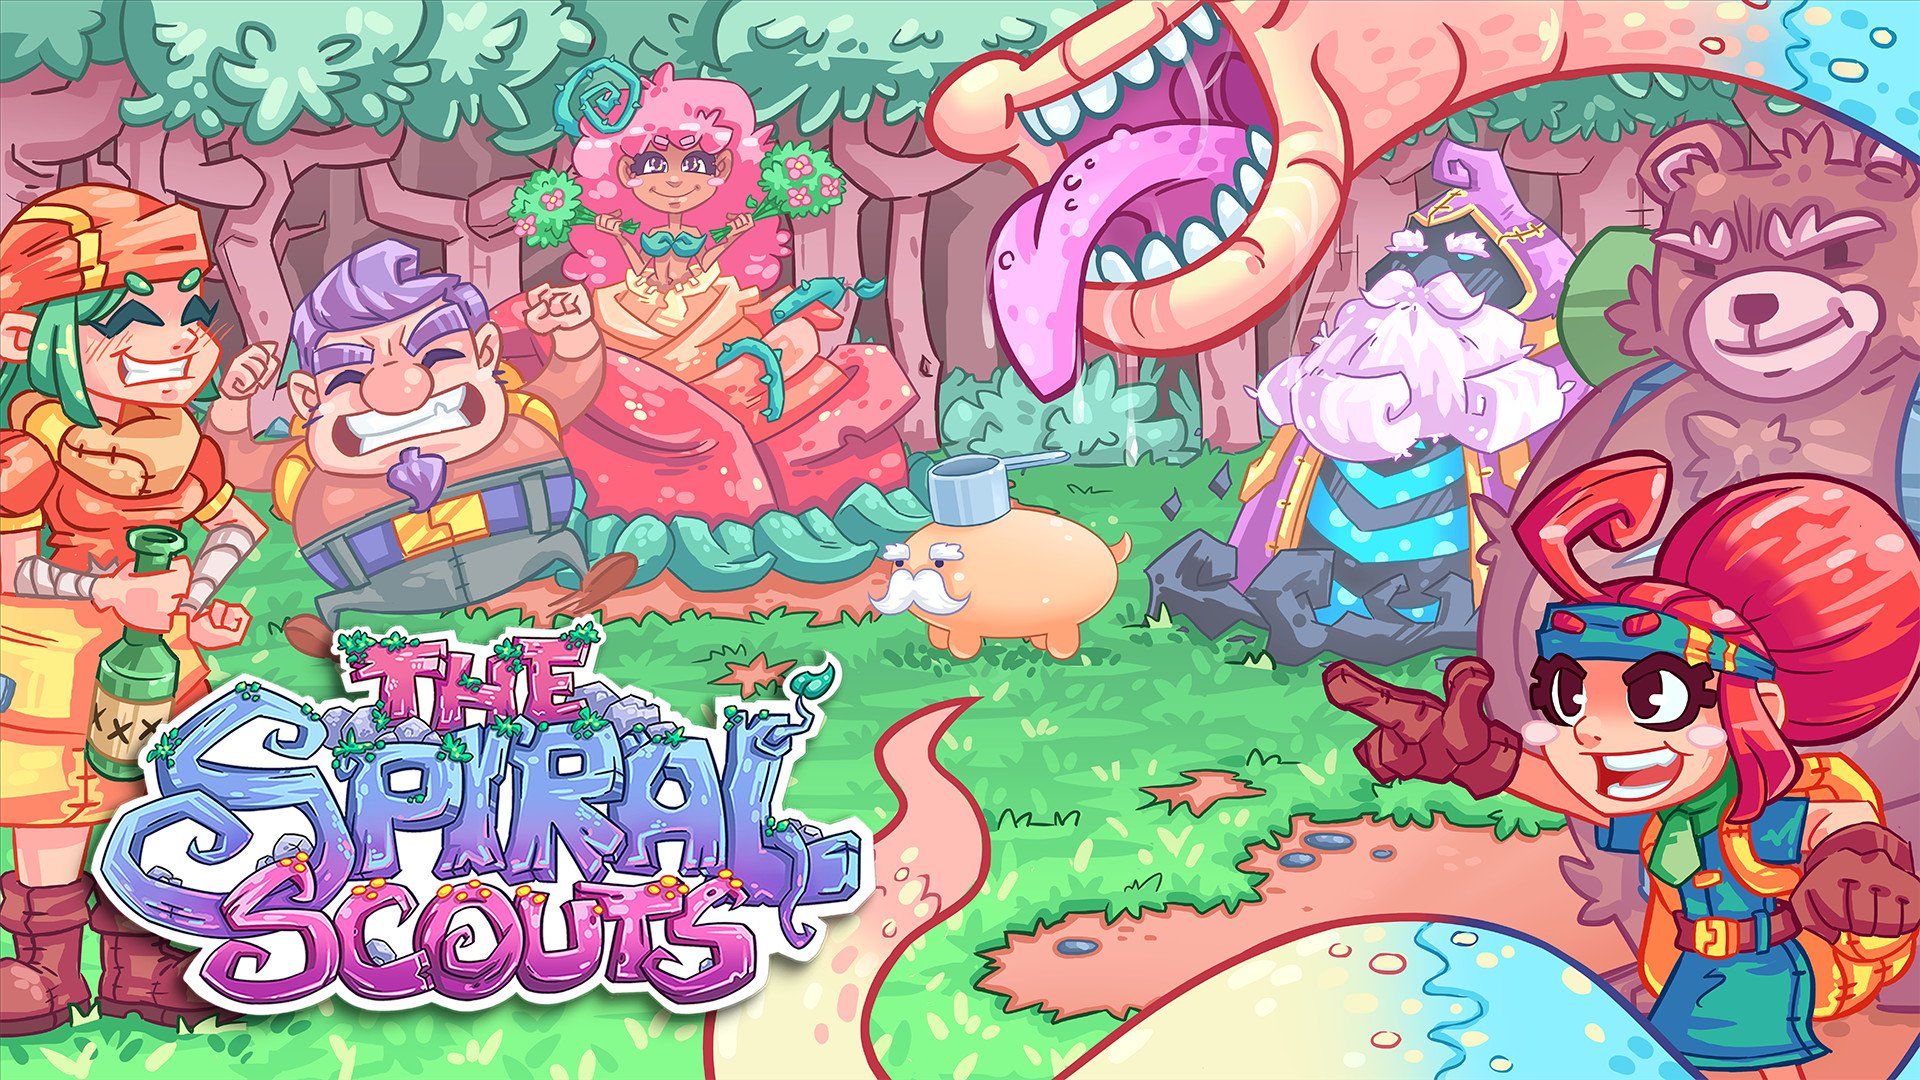 The Spiral Scouts Review – A Foul-Mouthed Yet Adorable Journey